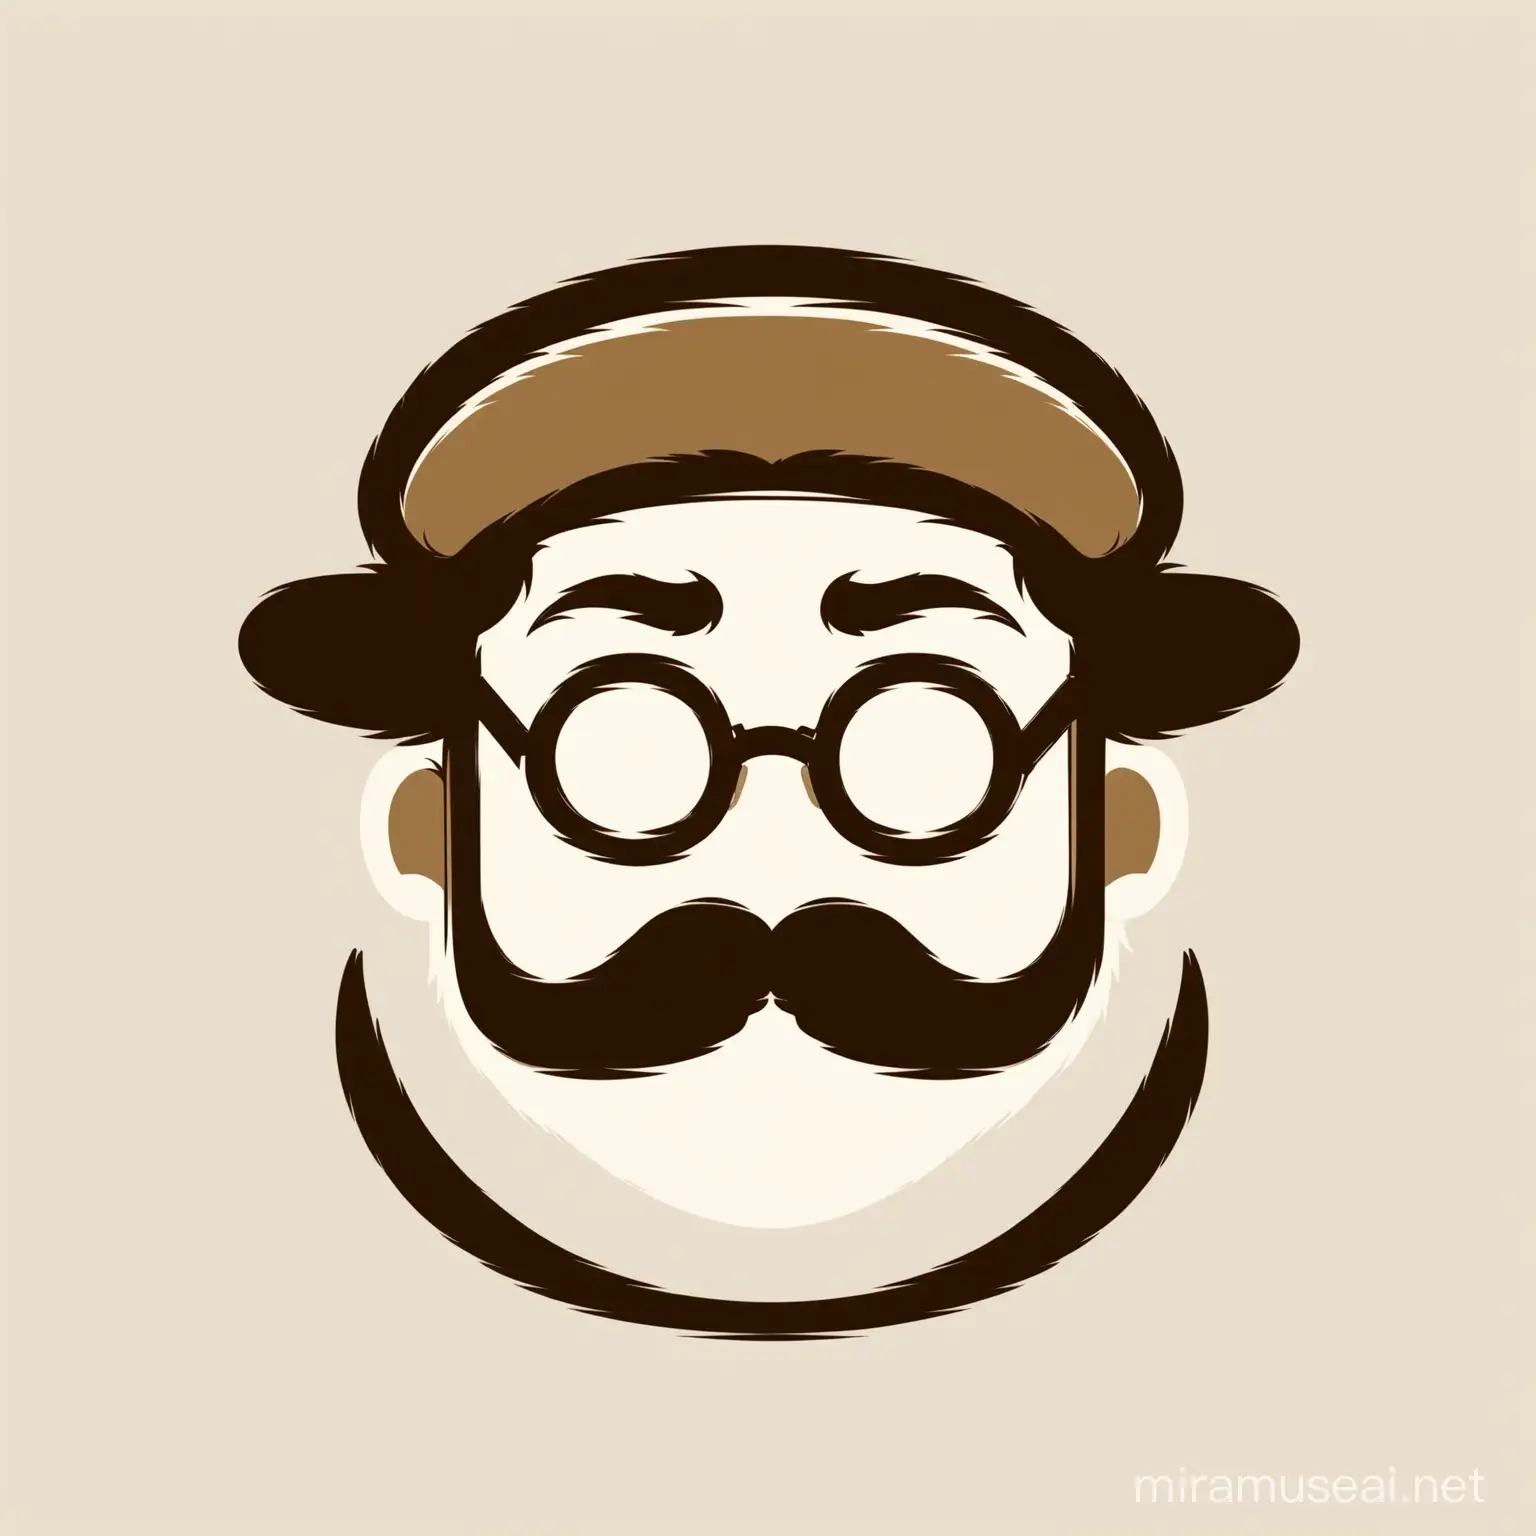 Stylish Learning Logo Mustache and Glasses Icon for USMUSA